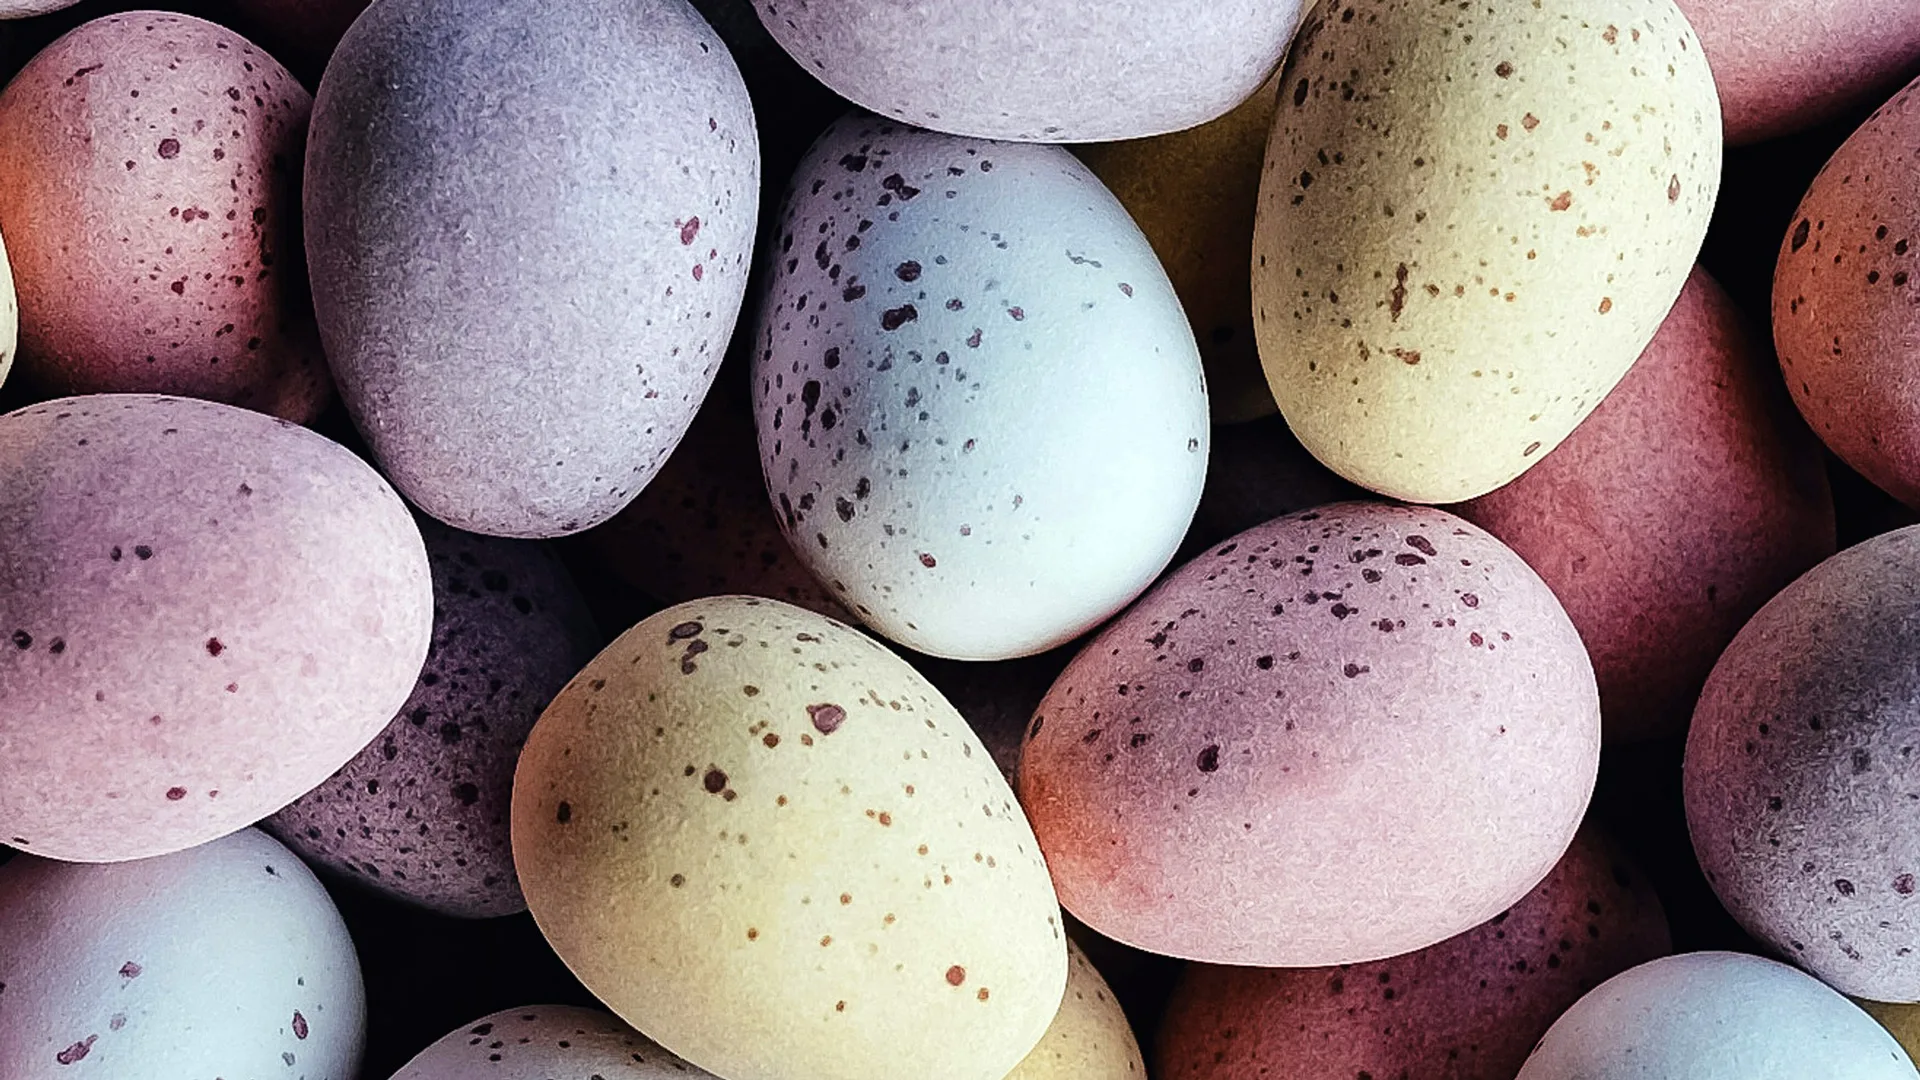 A close-up photograph of speckled chocolate mini eggs in shades of yellow, lilac and pink.